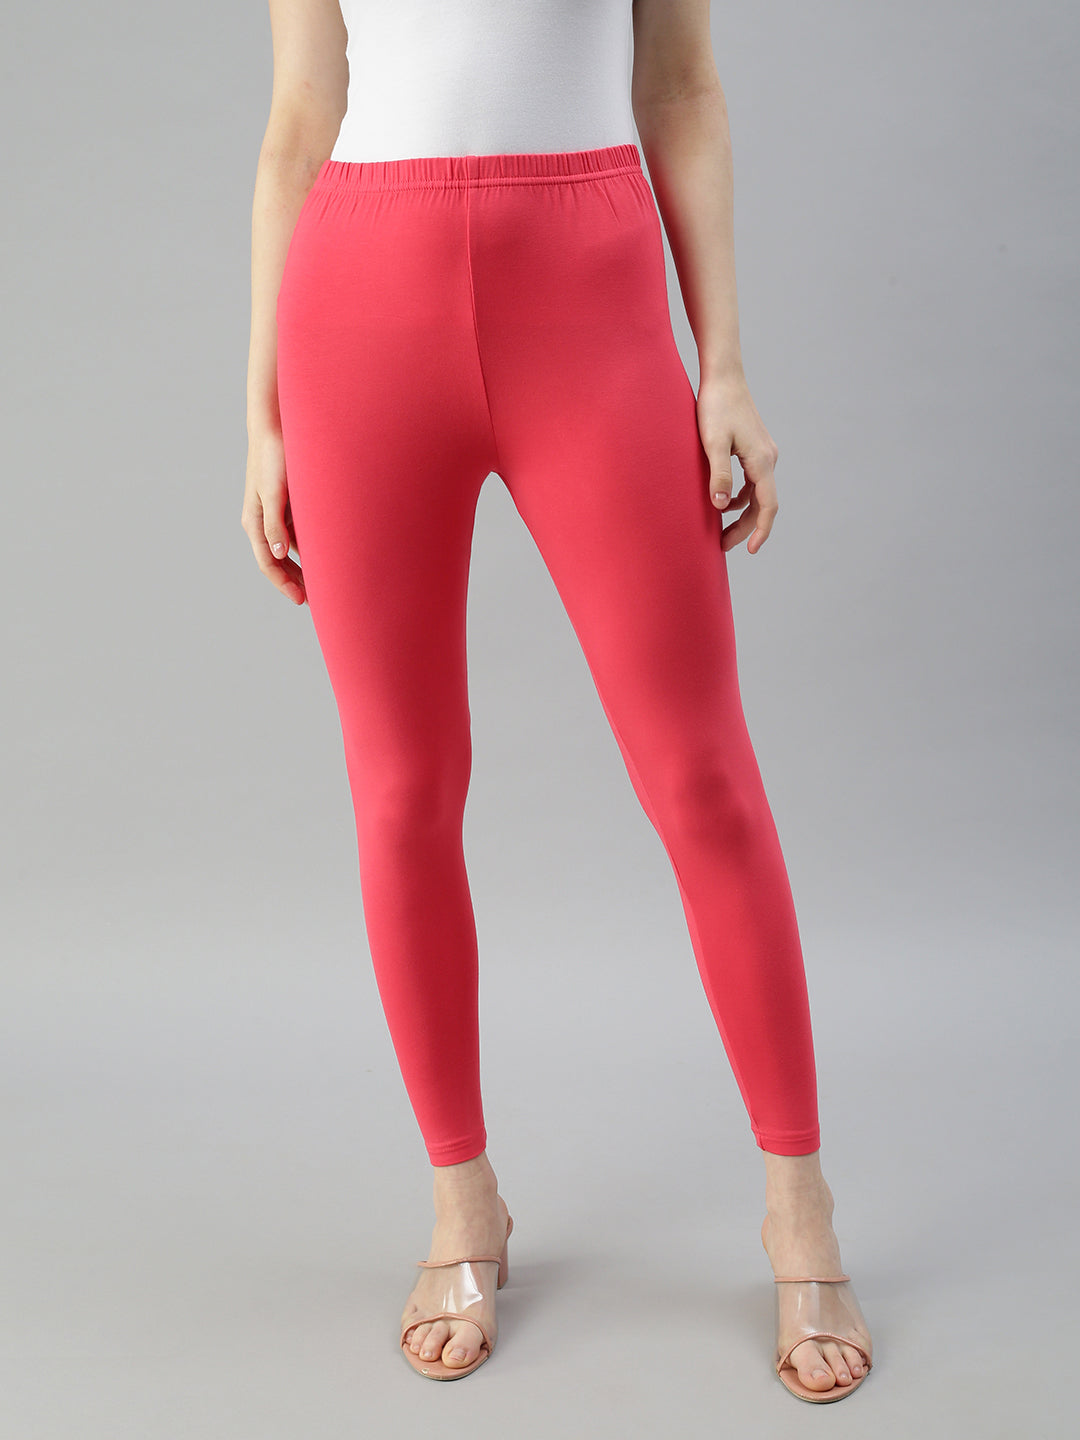 Shop Prisma's Deep Orchid Ankle Leggings for Comfort & Style